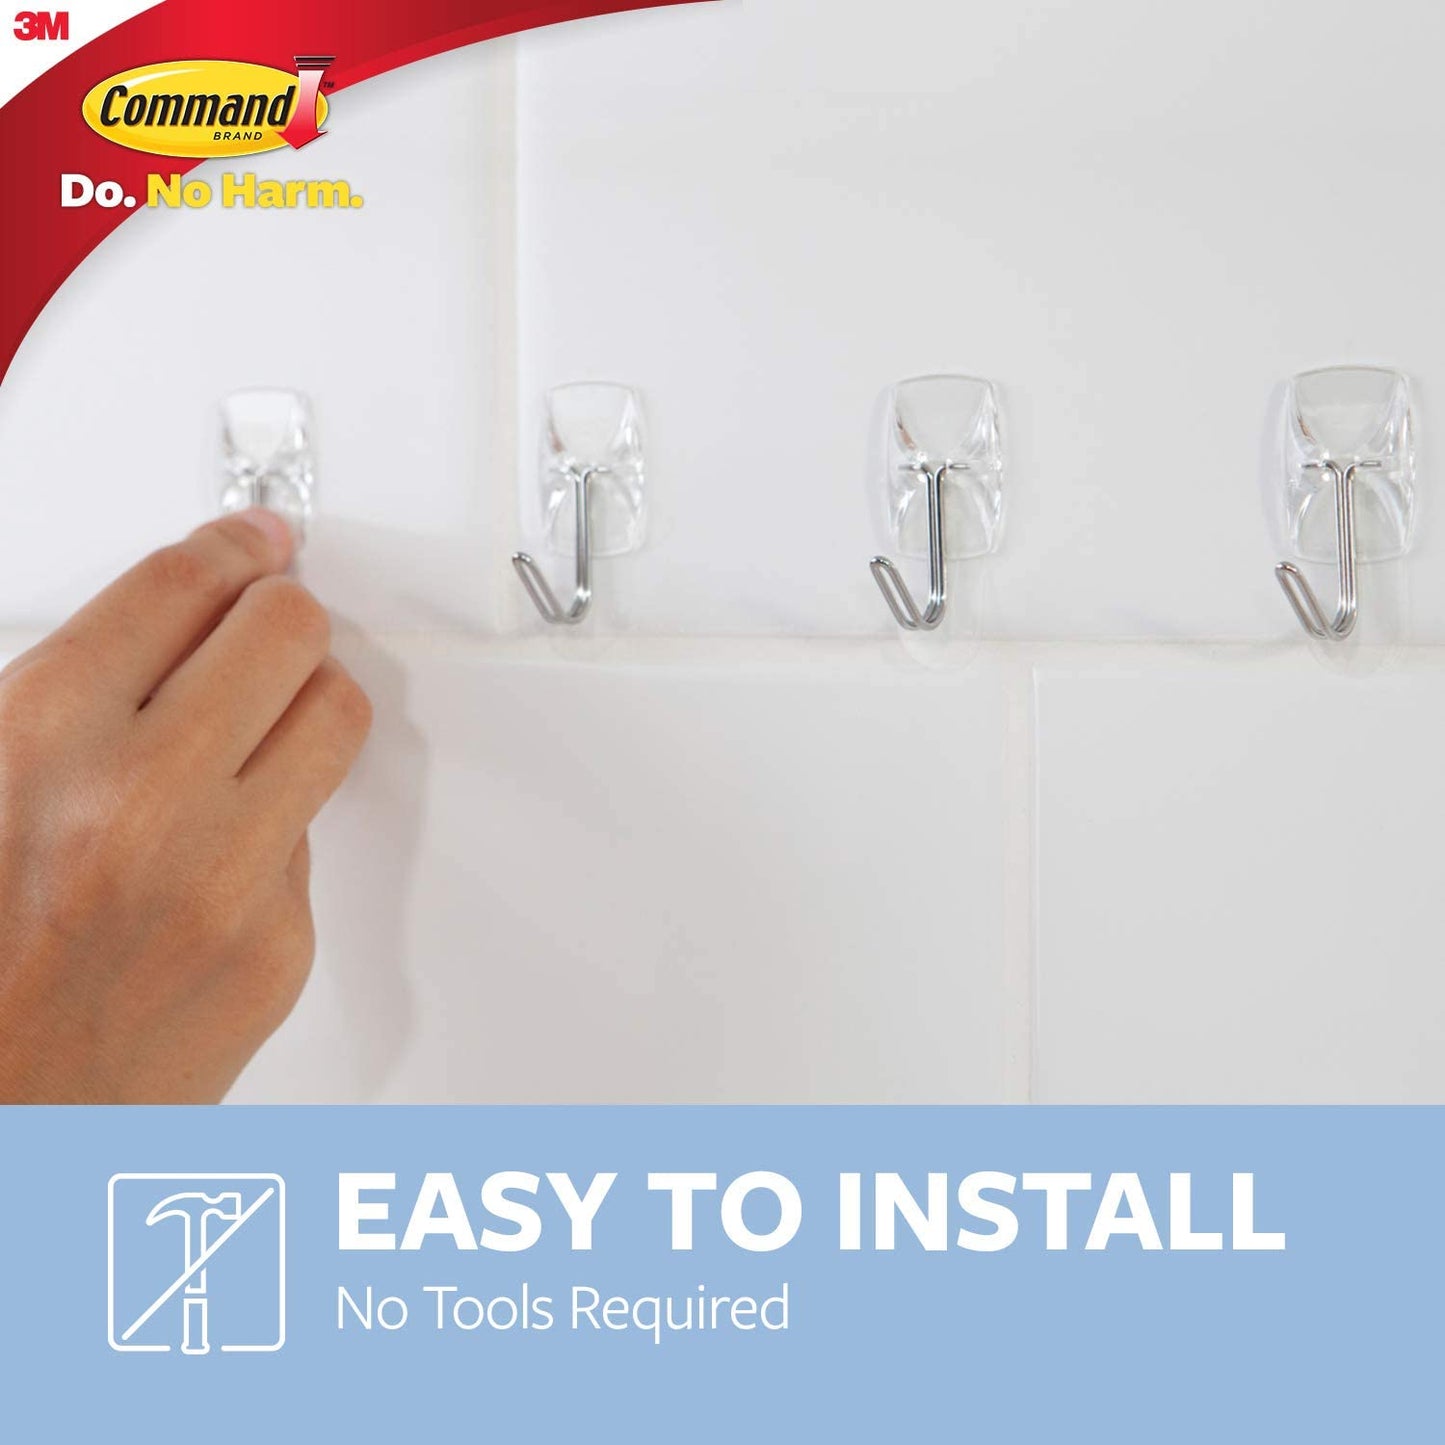 Command Clear Hooks and Strips, Plastic/Wire, Small, 6 Hooks and 8 Strips Holds strongly Removes Cleanly